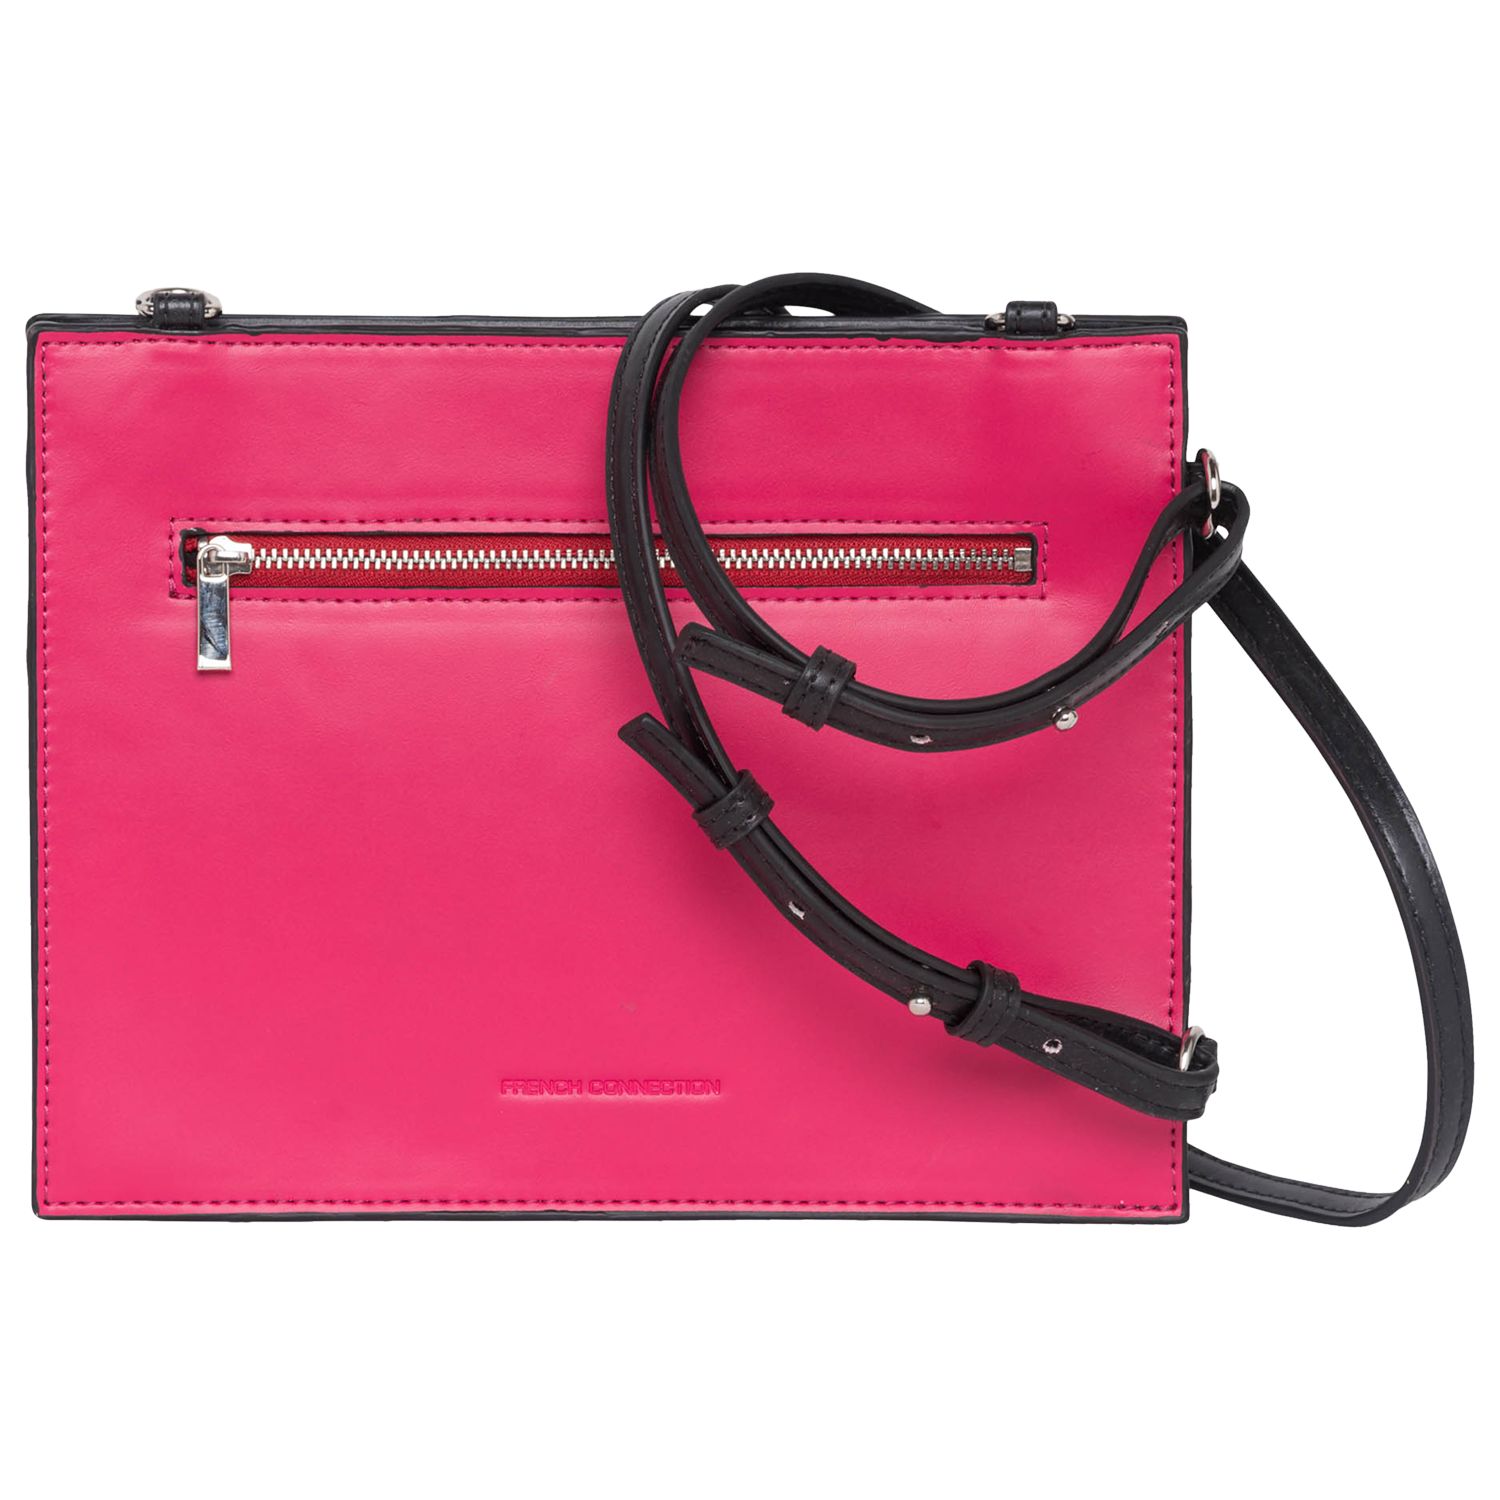 French Connection Dexter Upside Down Cross Body Bag